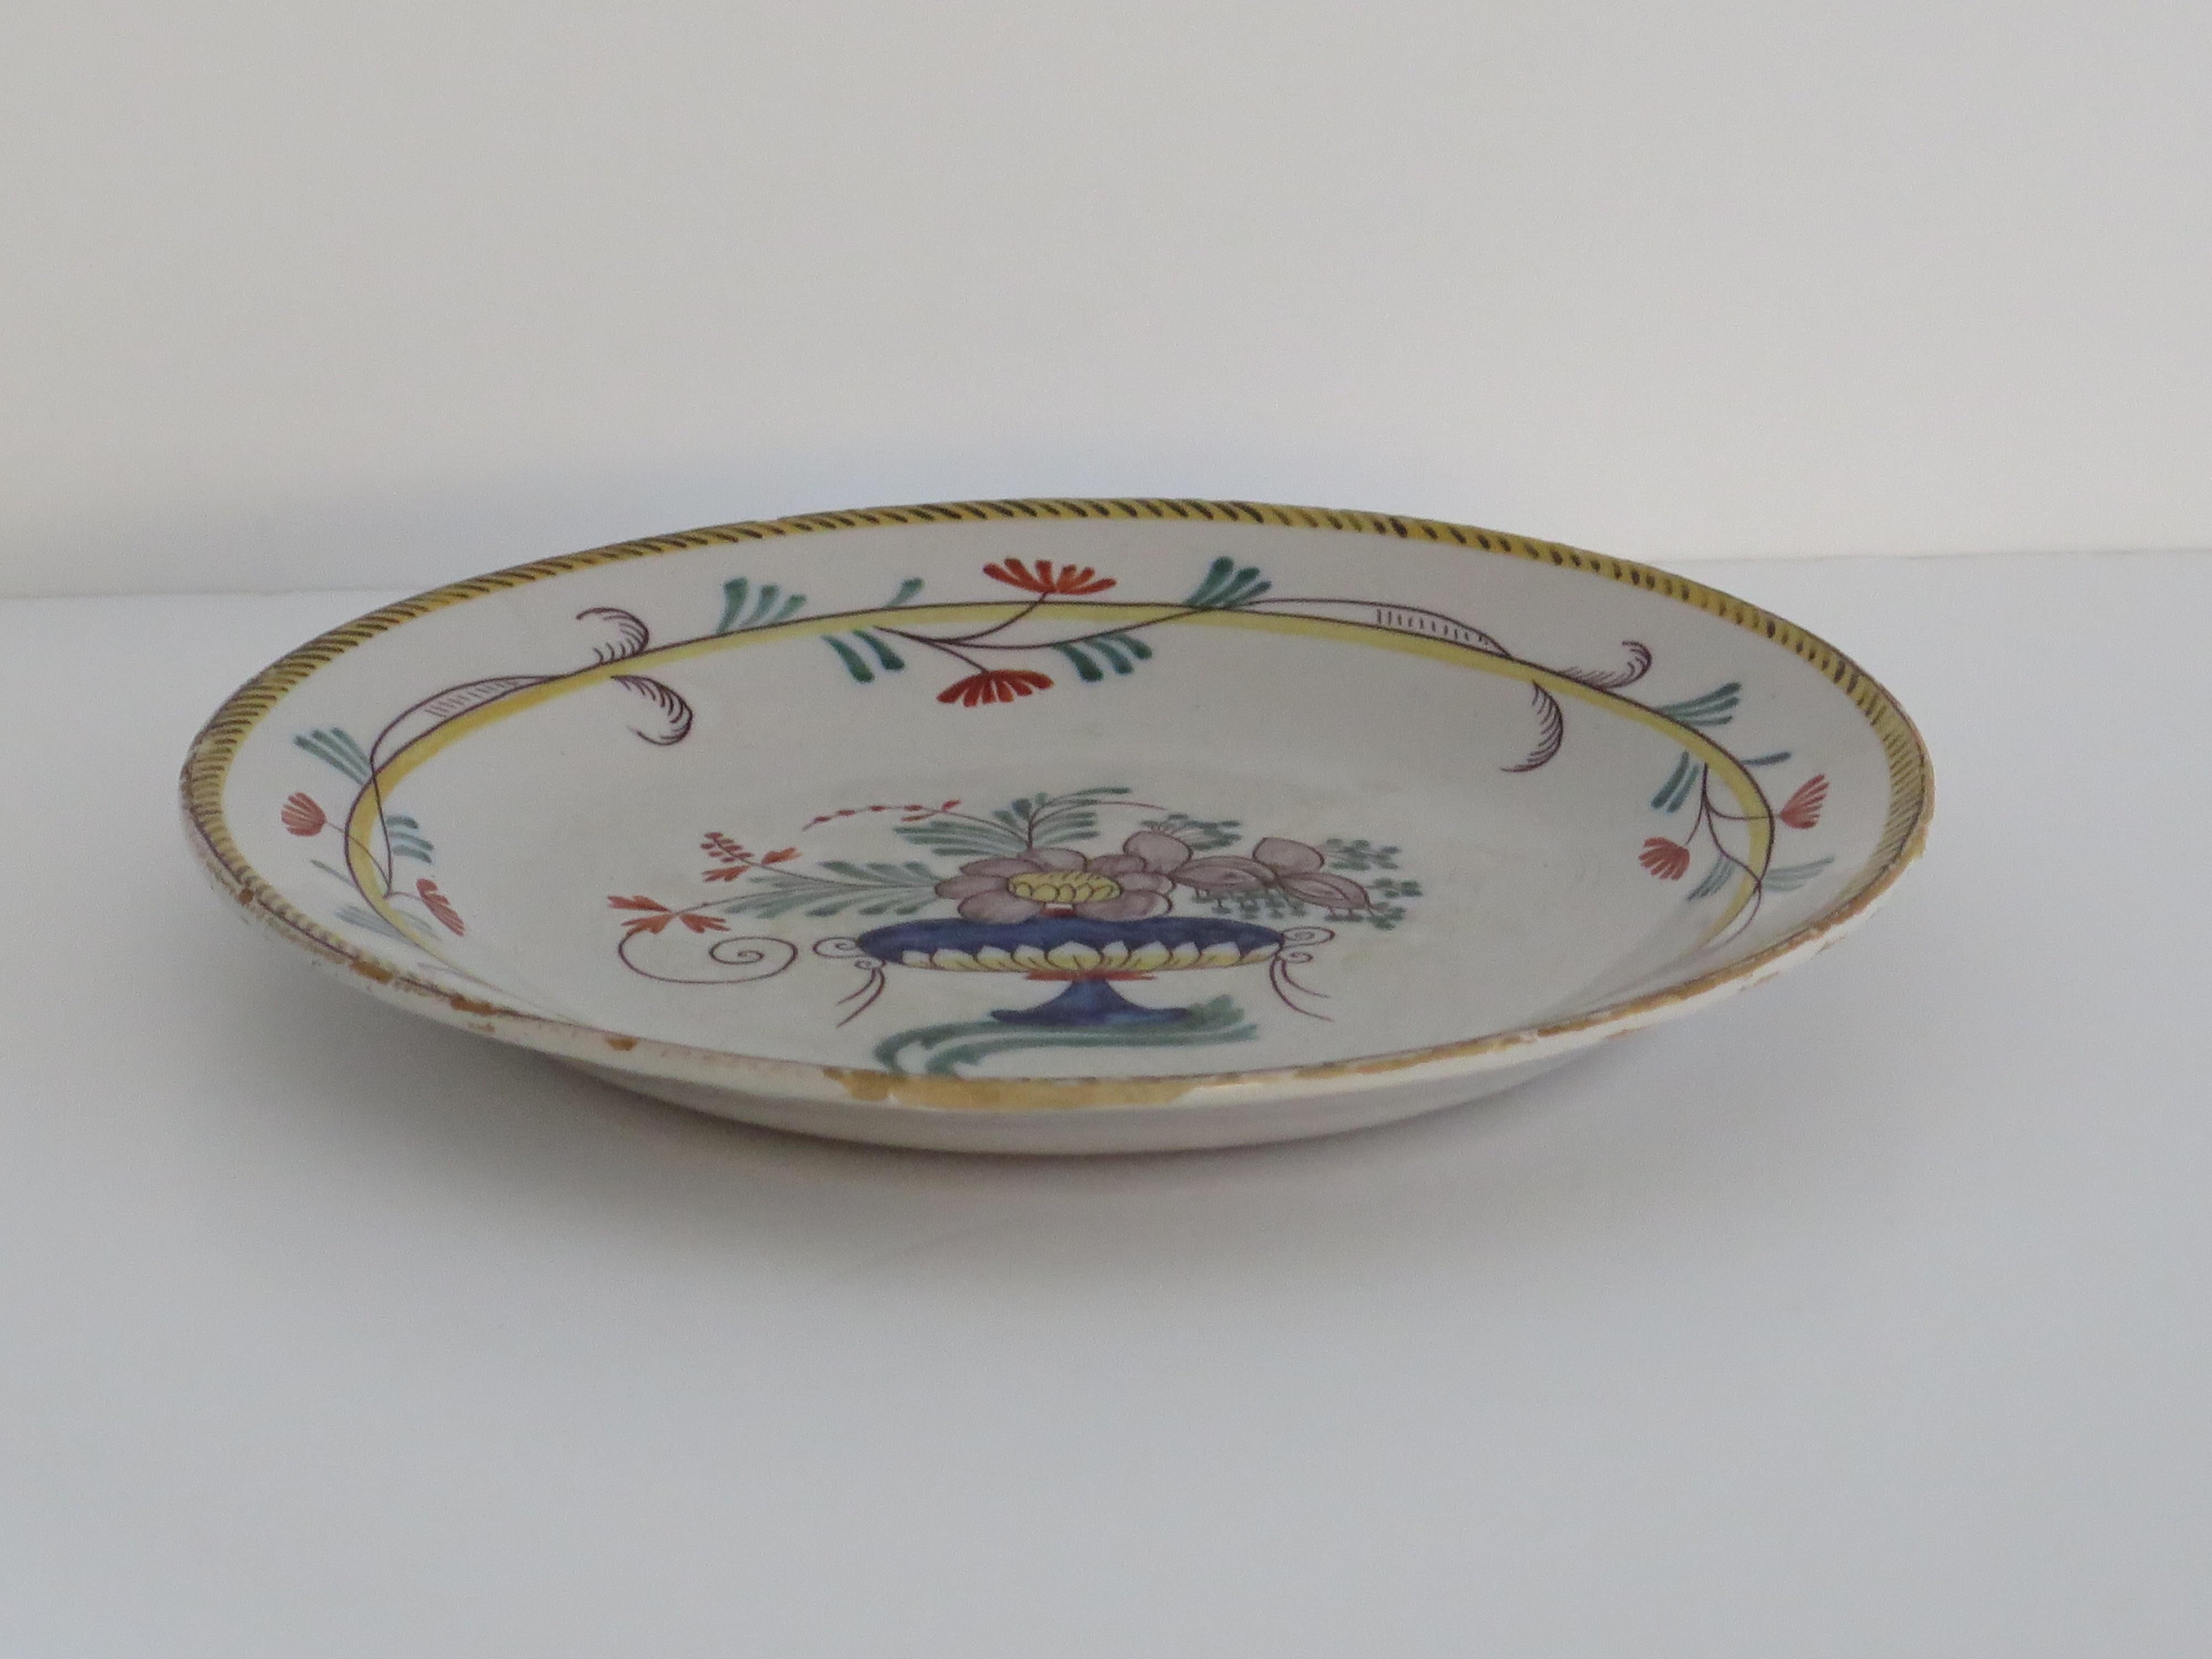 This is a very decorative French Faience plate dinner plate made from tin-glazed earthenware (pottery) which we date to the late 18th century.

The plate has a pan shaped base with no foot rim.

This plate is hand-painted in a flowing style with